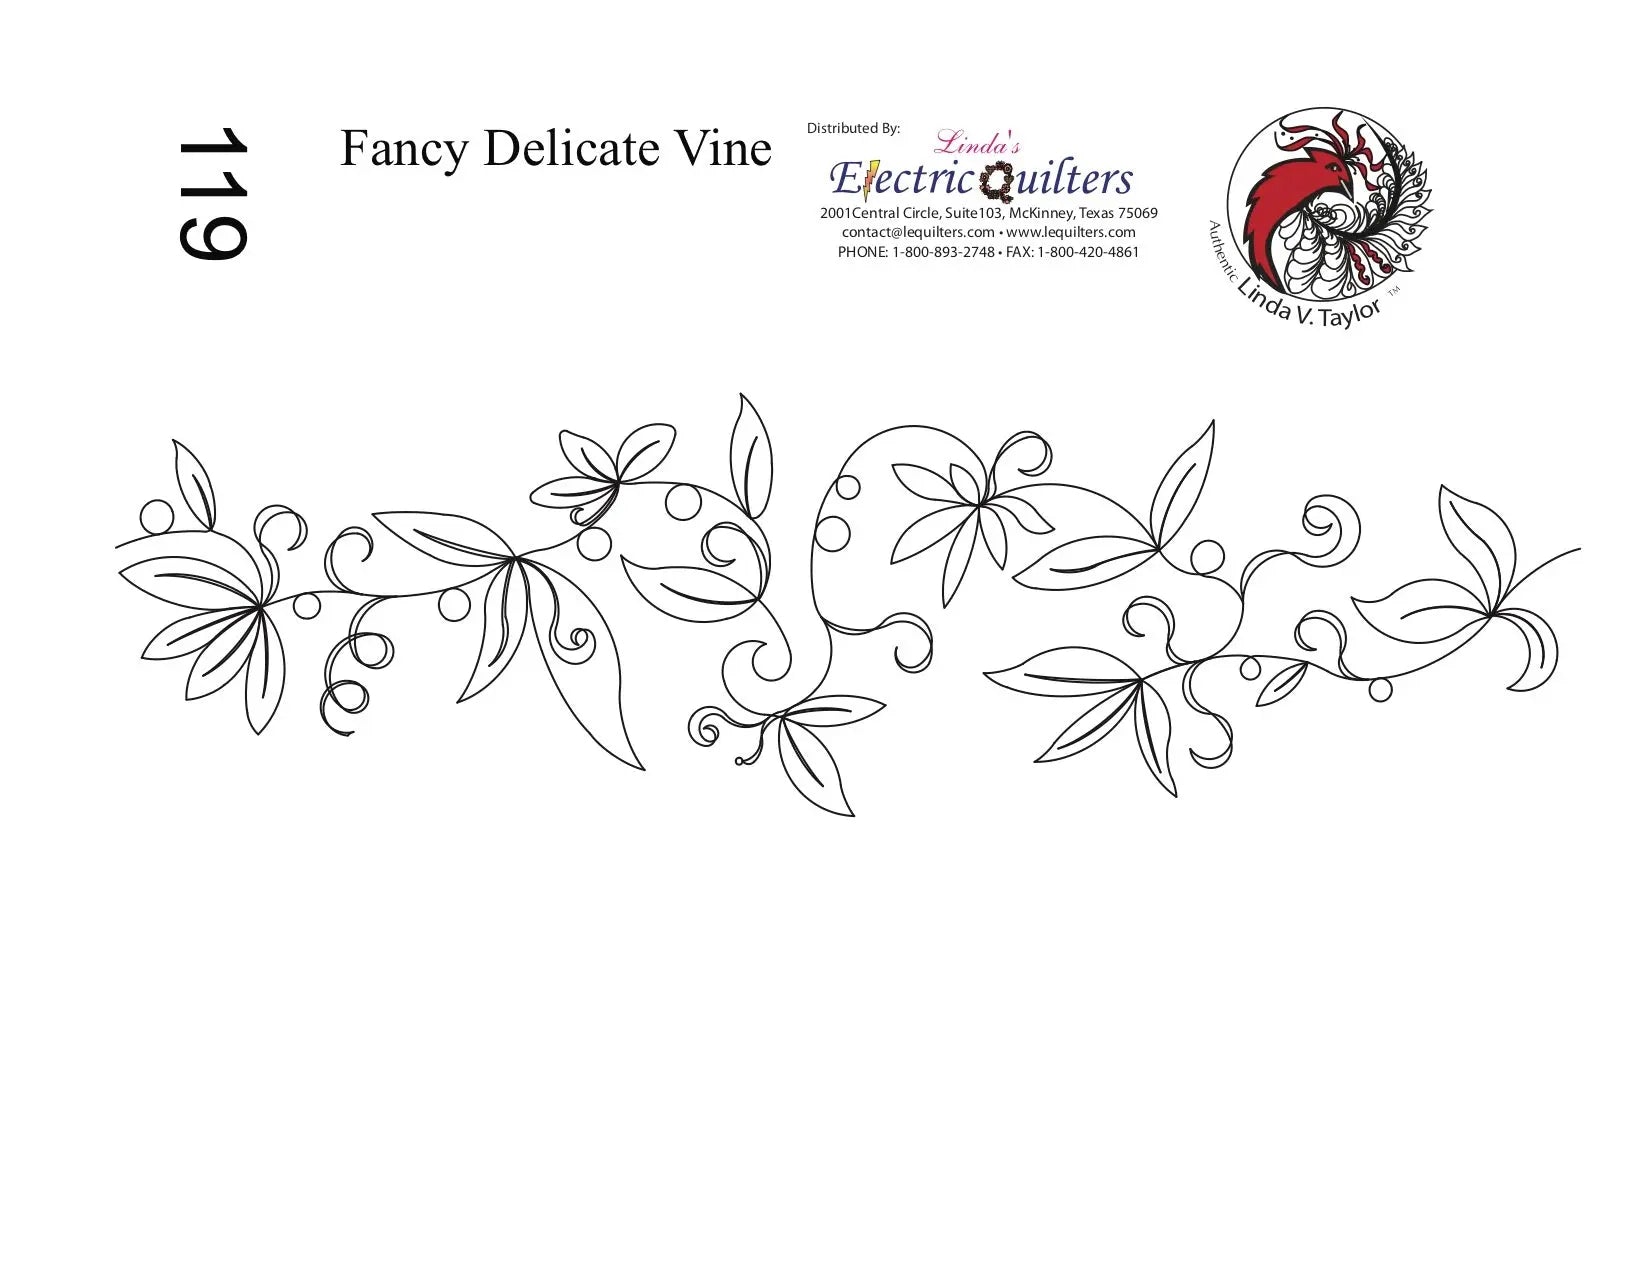 119 Fancy Delicate Vines Pantograph by Linda V. Taylor - Linda's Electric Quilters